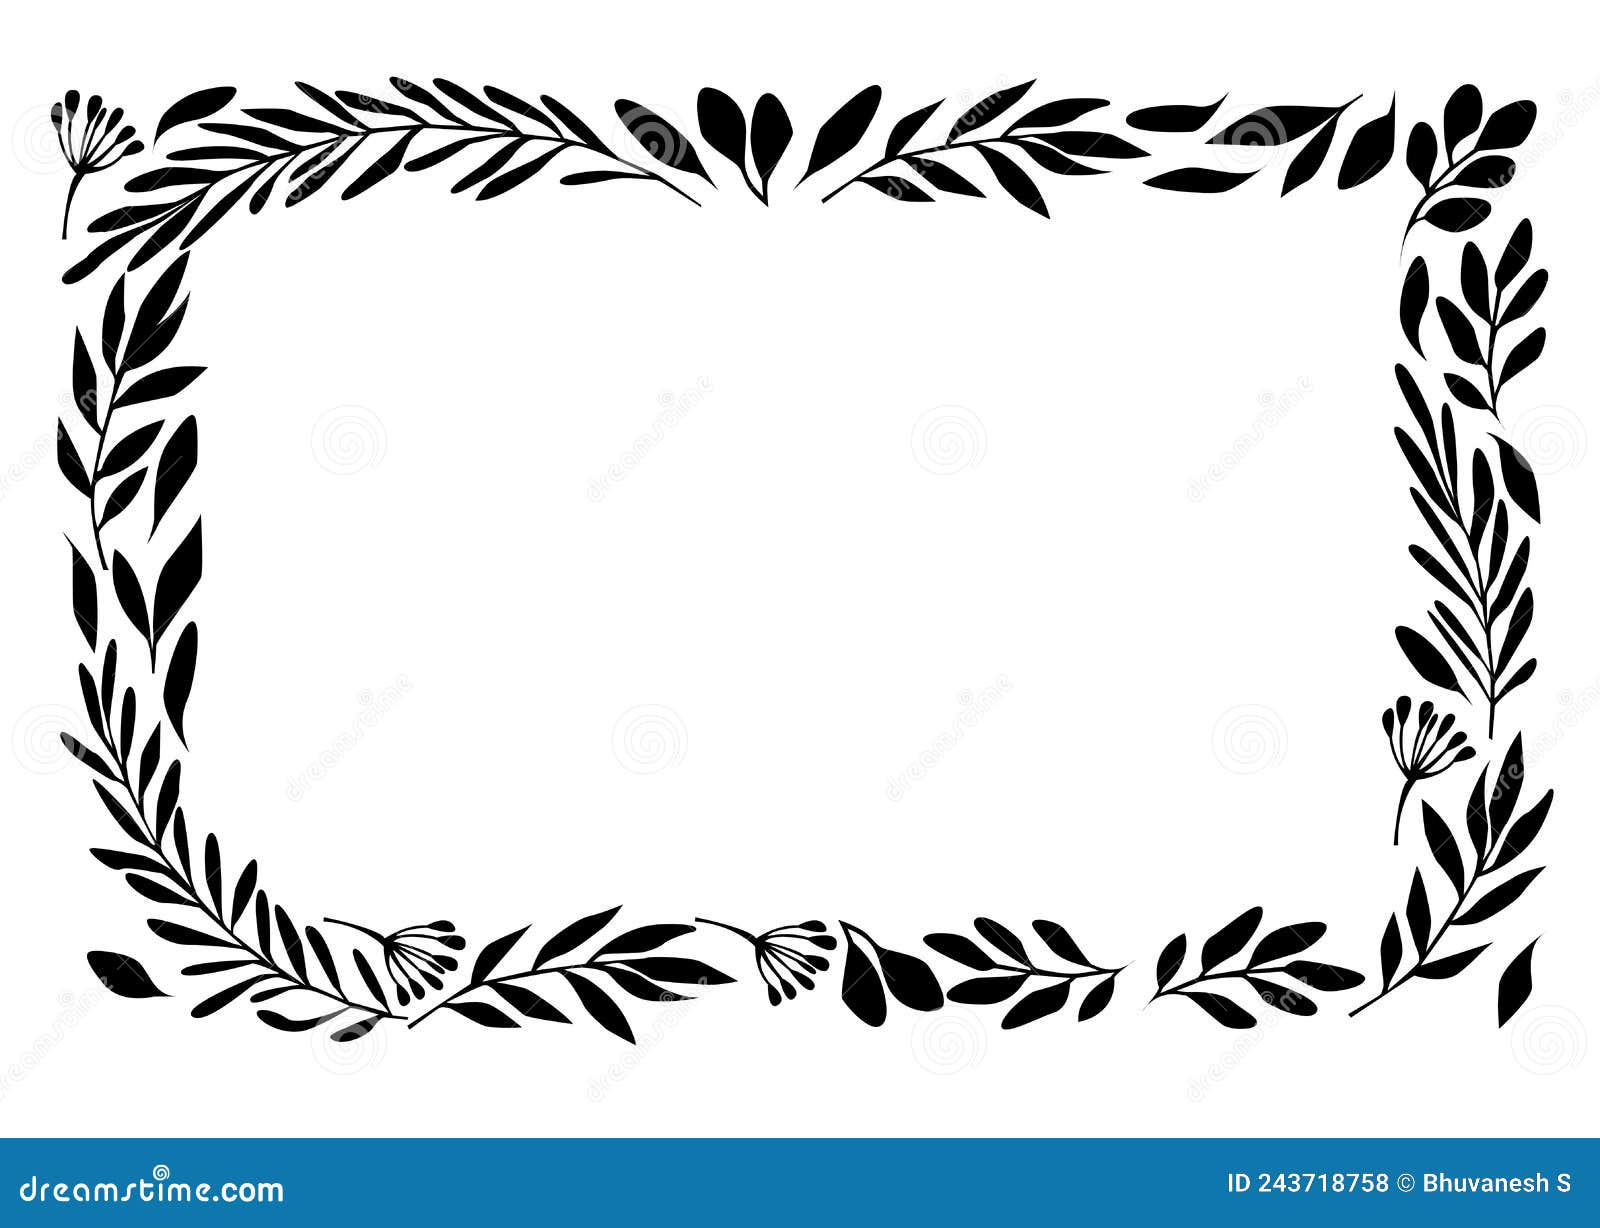 Floral Leafy Rectangle Border Design Isolated Stock Vector ...